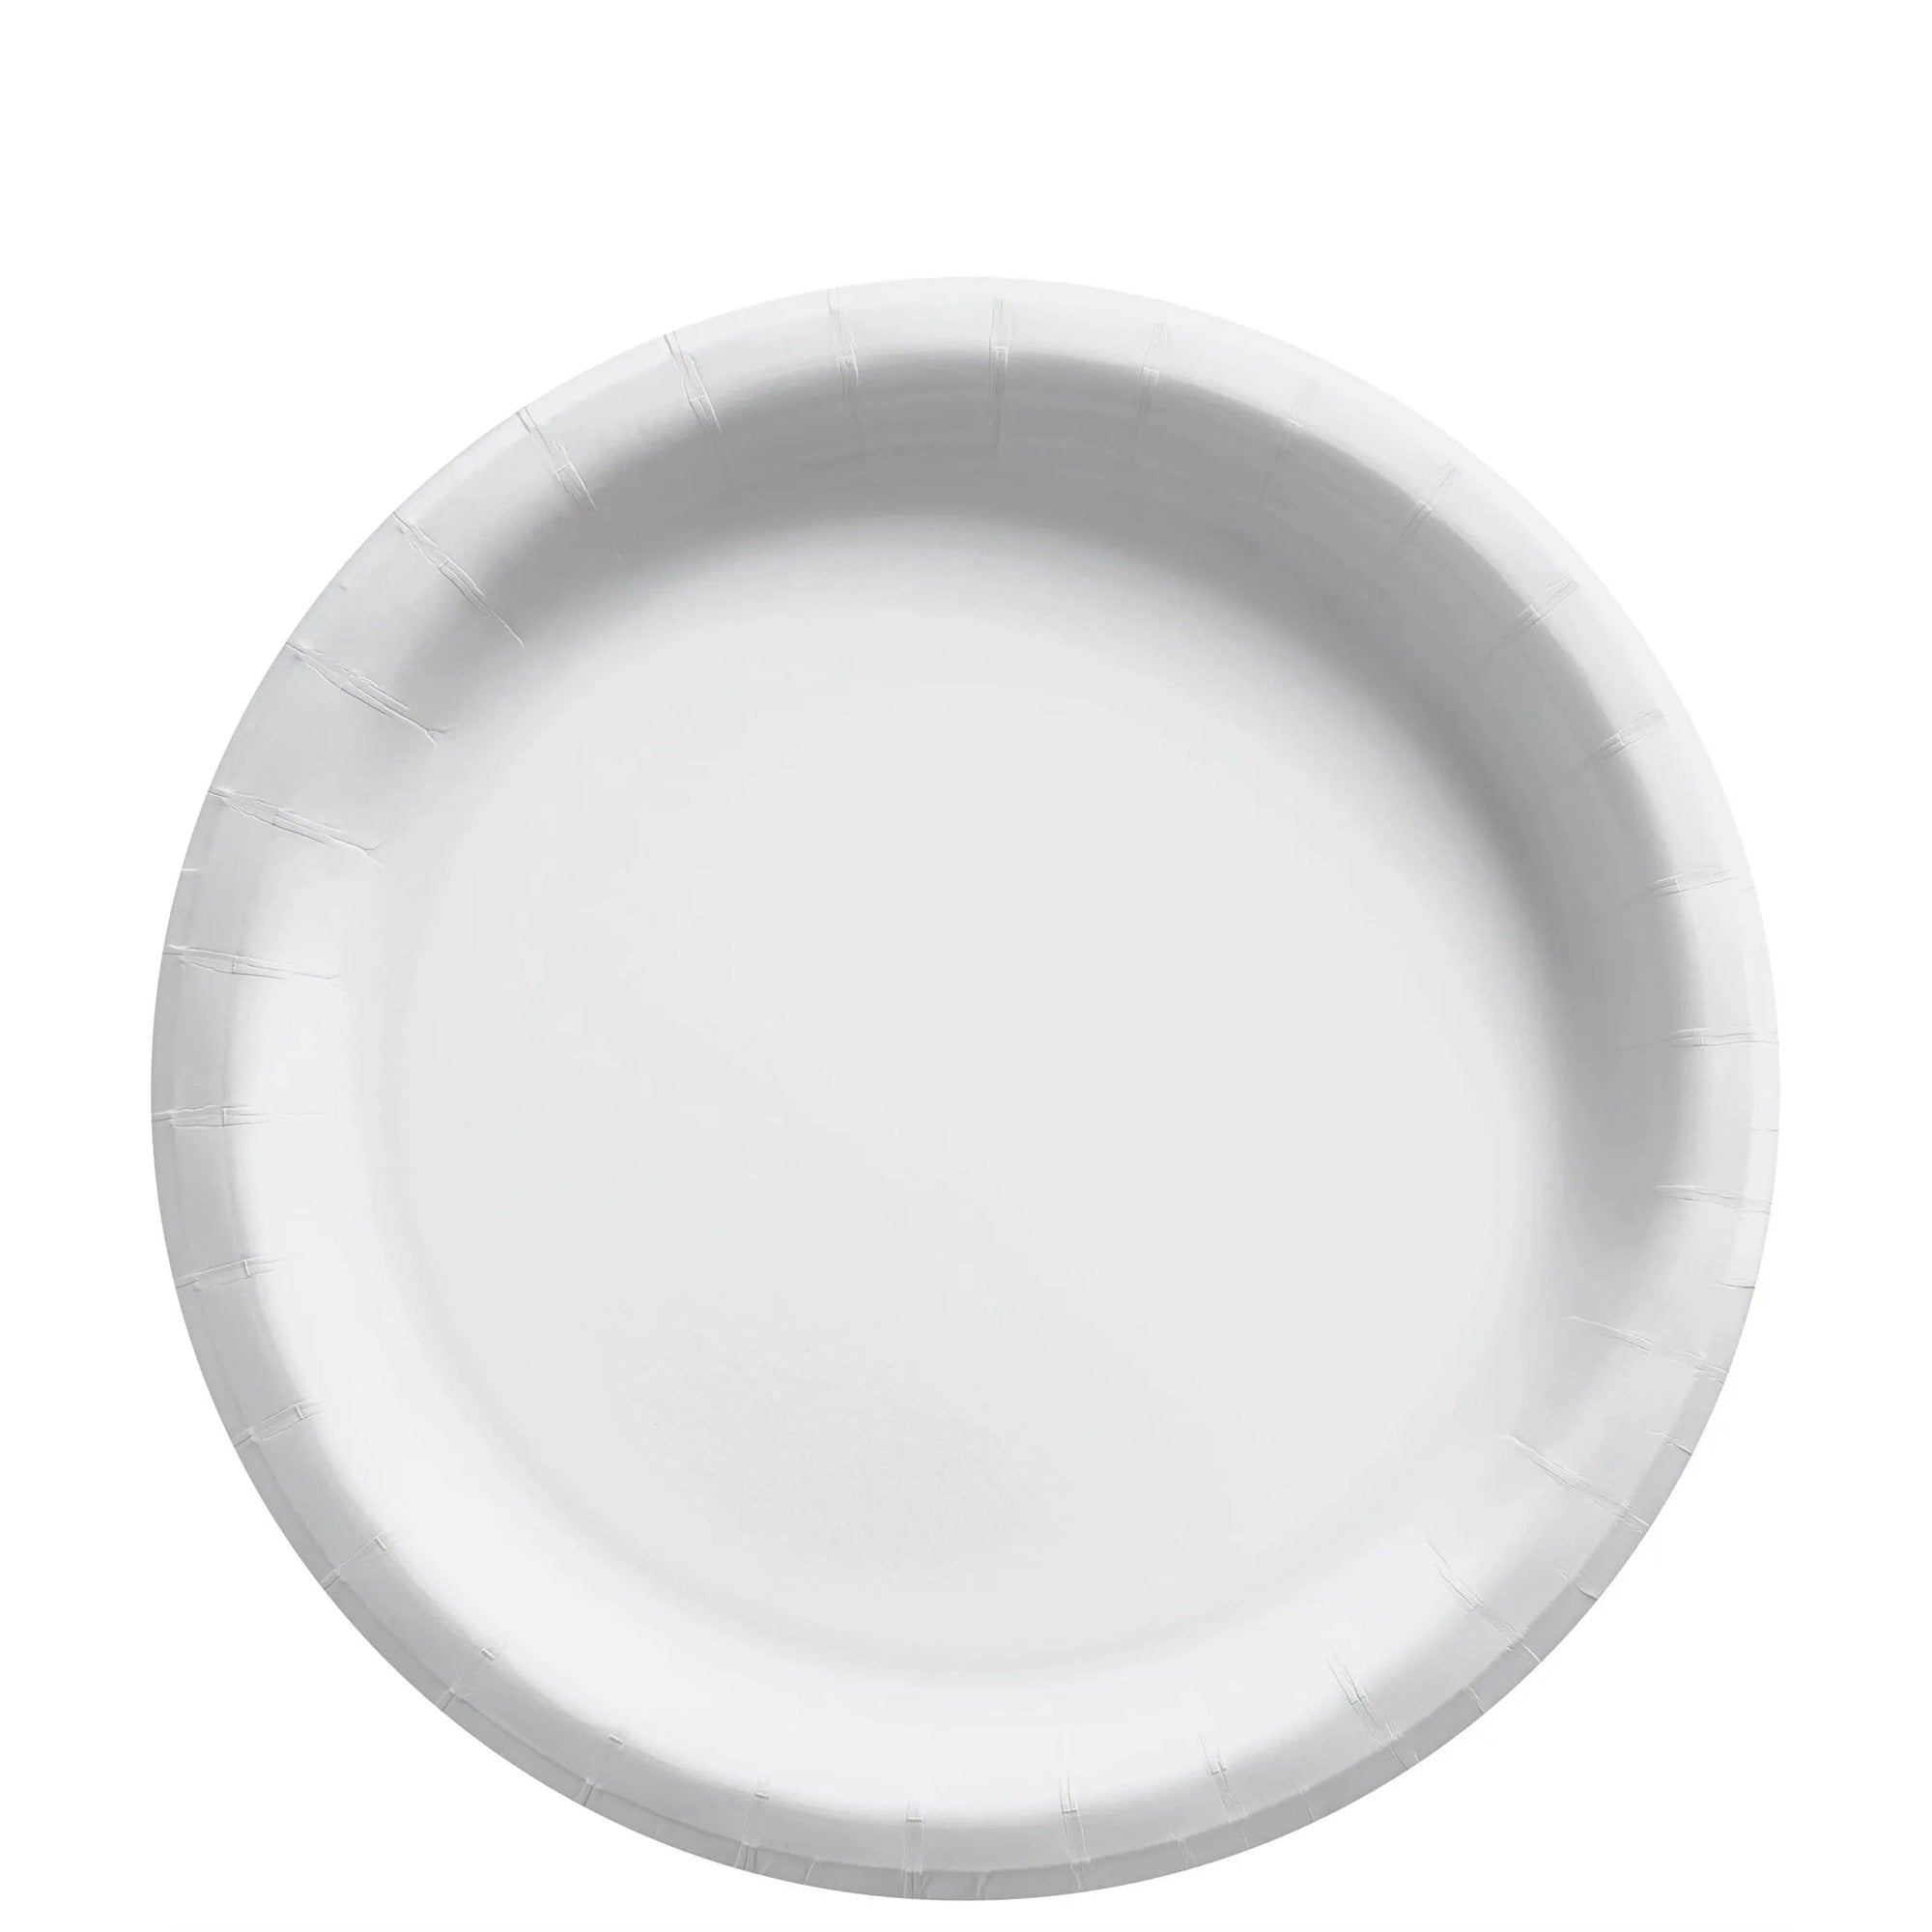 Frosty White Round Paper Plates Midcount 6in, 20pcs